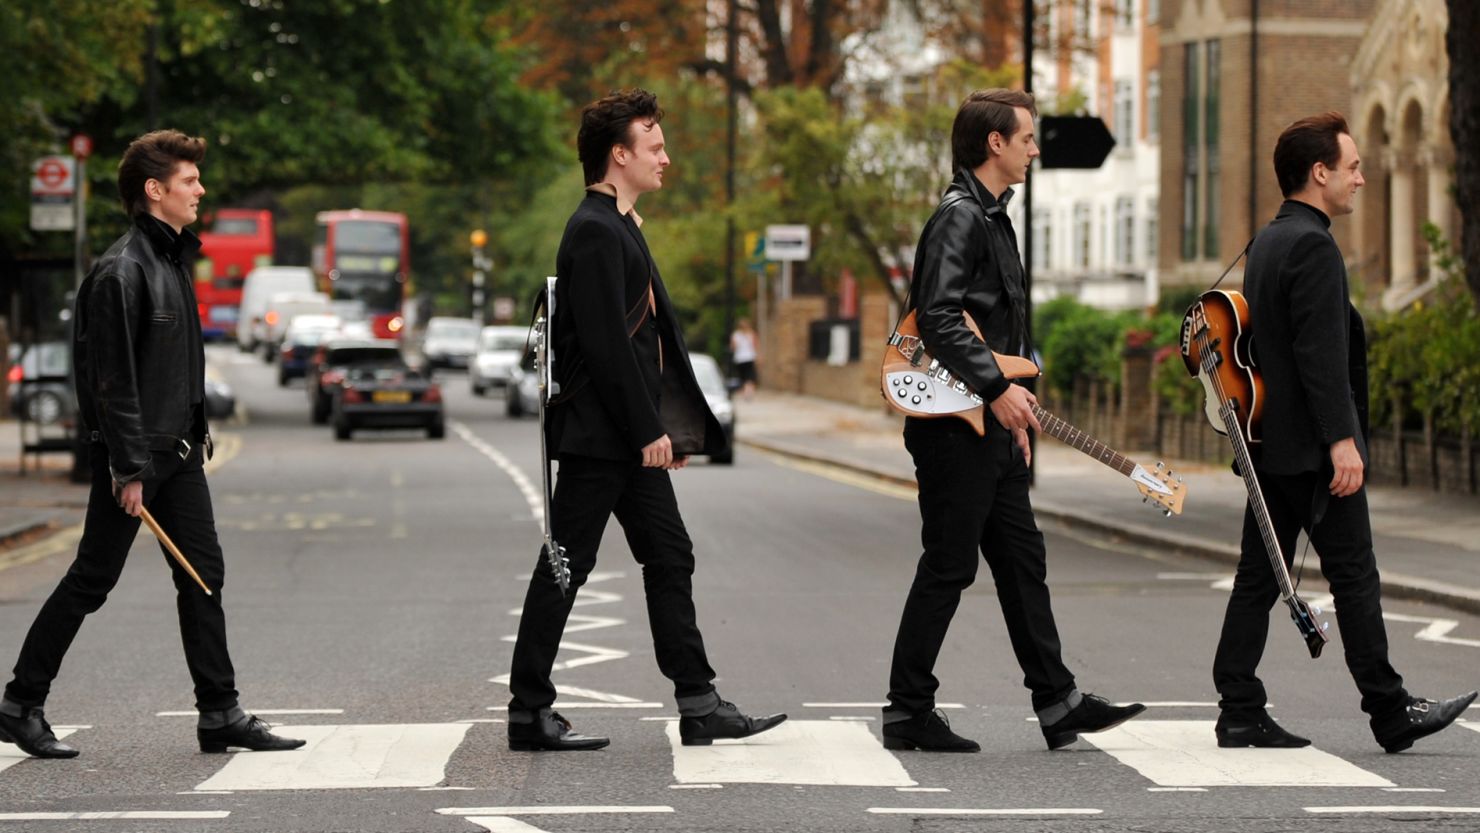 The cast of the London stage show "Backbeat" recreated the "Abbey Road" cover. So can you.